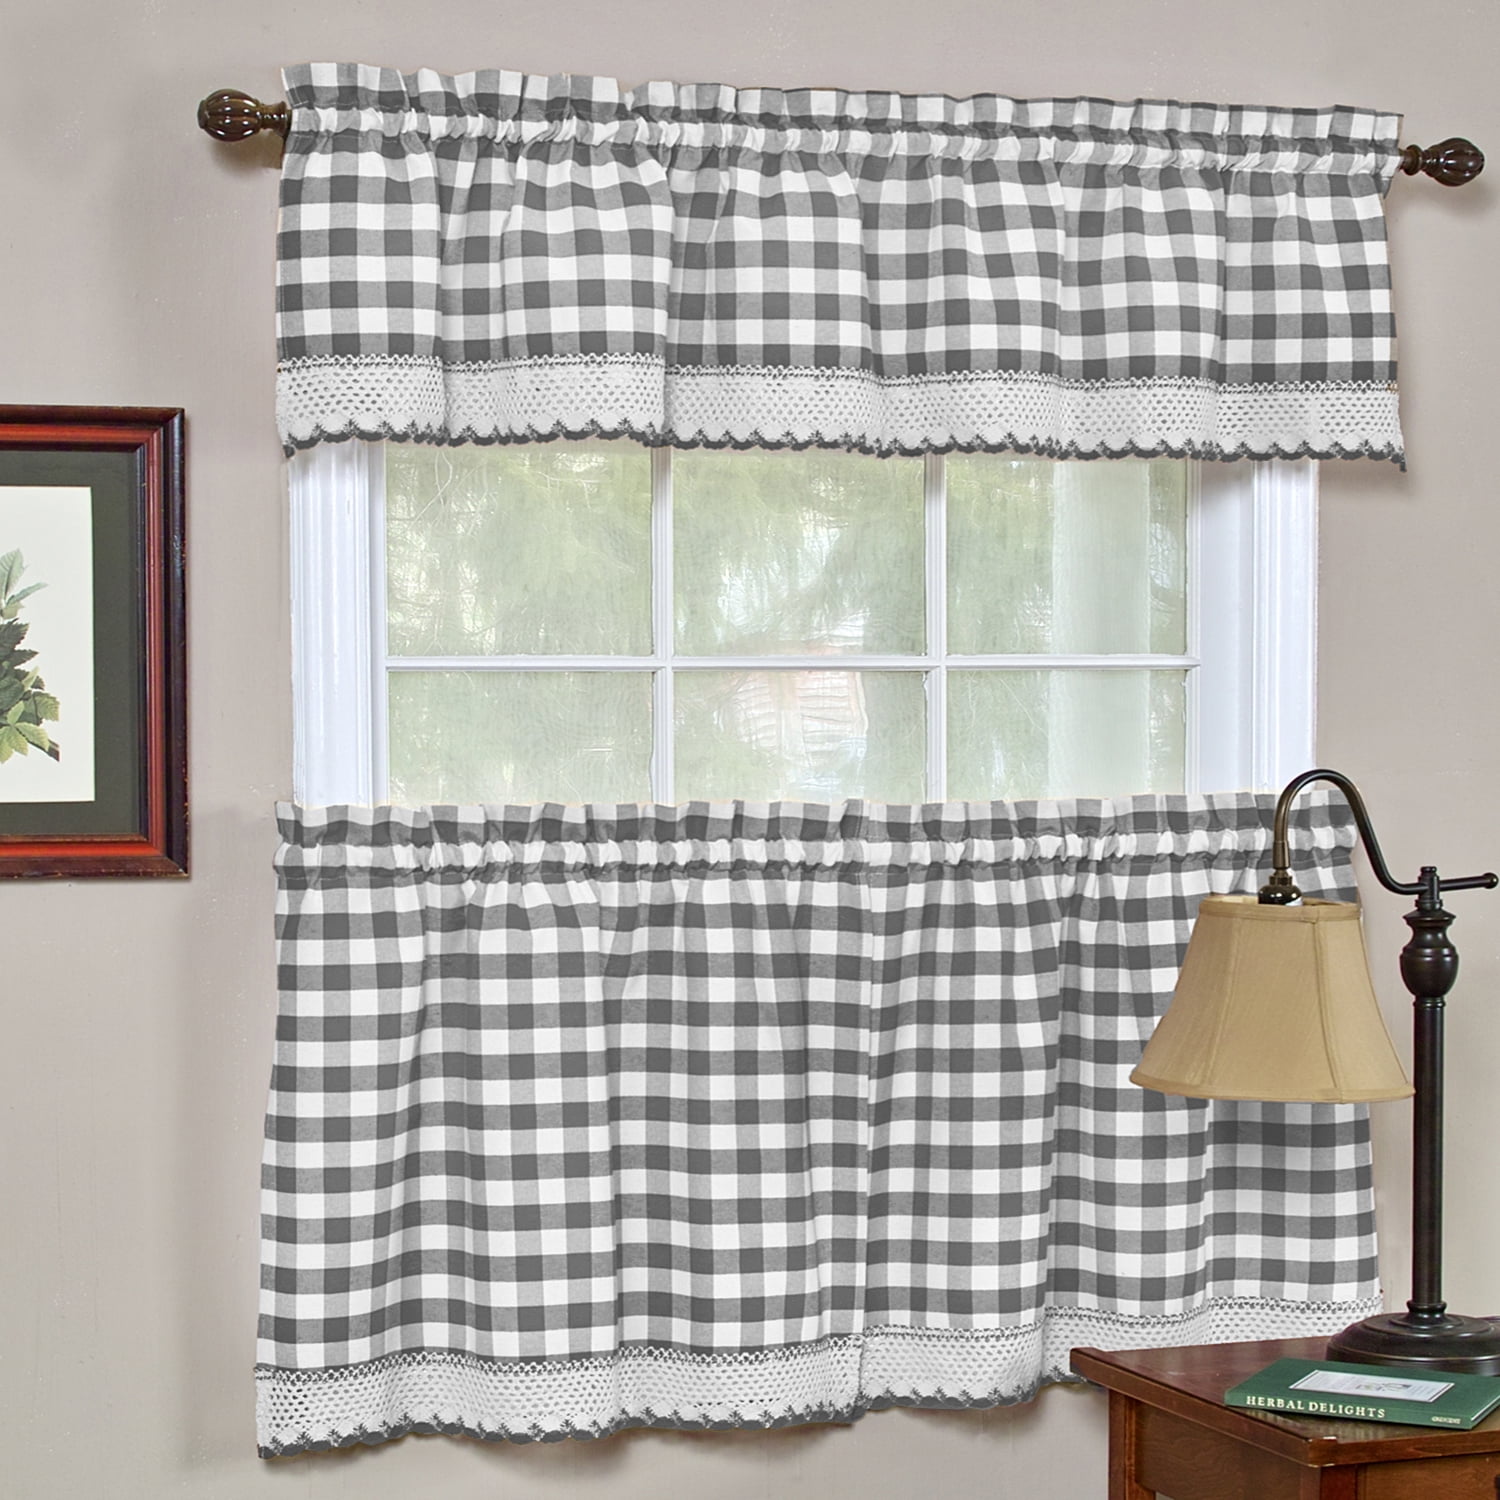 Gingham Curtain Valances for Kitchen Living Dining Room Cotton Blend Fit Window Curtain 58 x 15 inches Rod Pocket 1 Plaid Valance Black